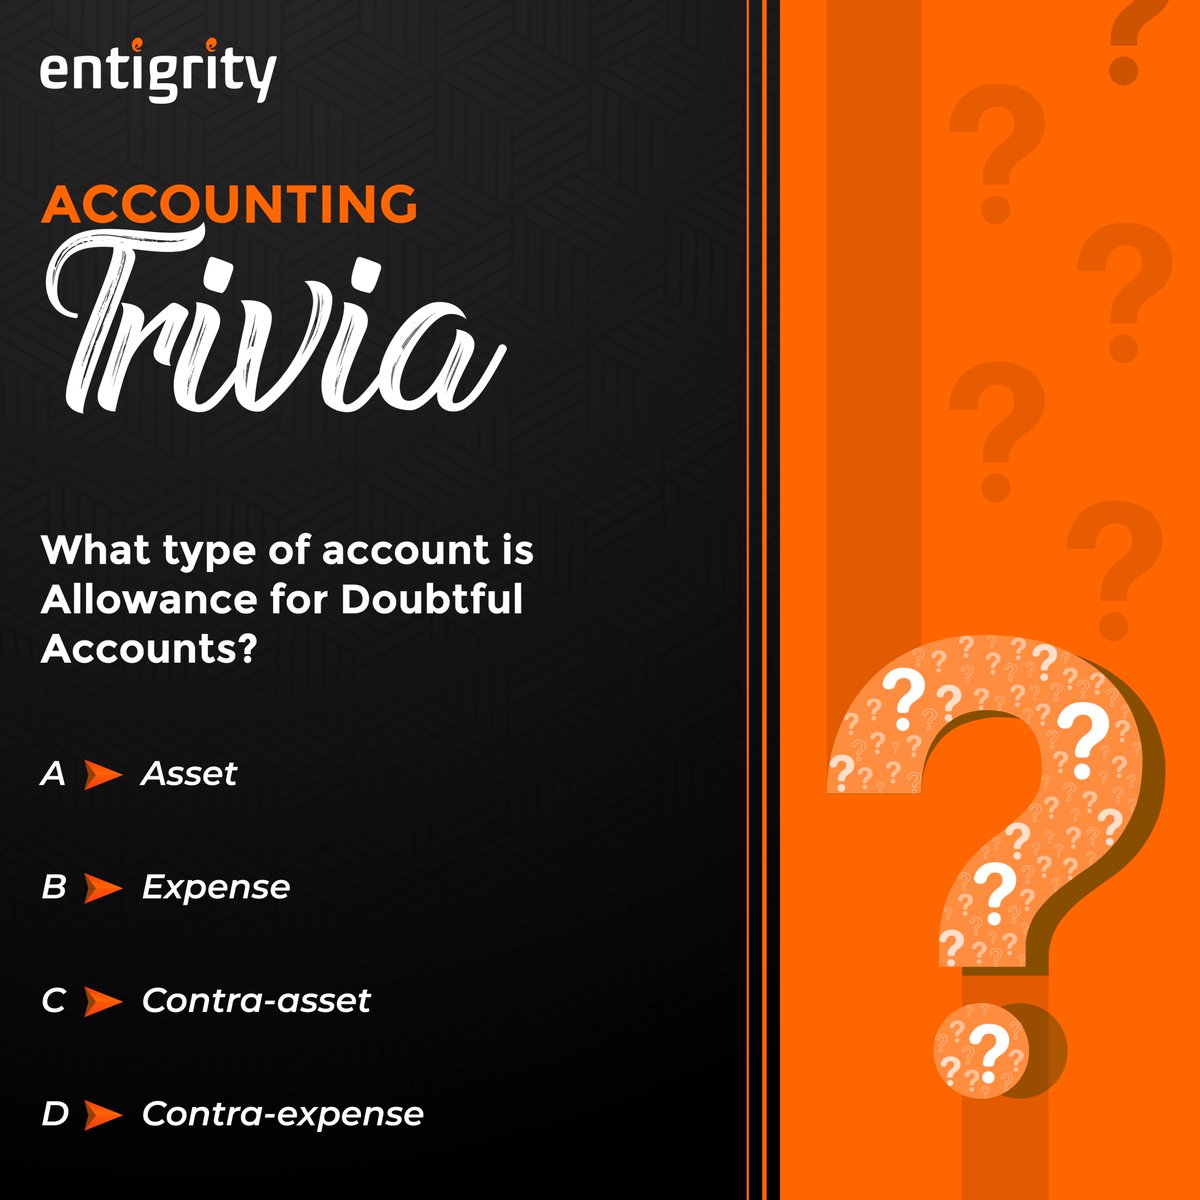 Think you've got what it takes to tackle this Accounting Trivia Quiz? Let's put your knowledge to the test! #Entigrity #AccountingTrivia #AccountingQuiz